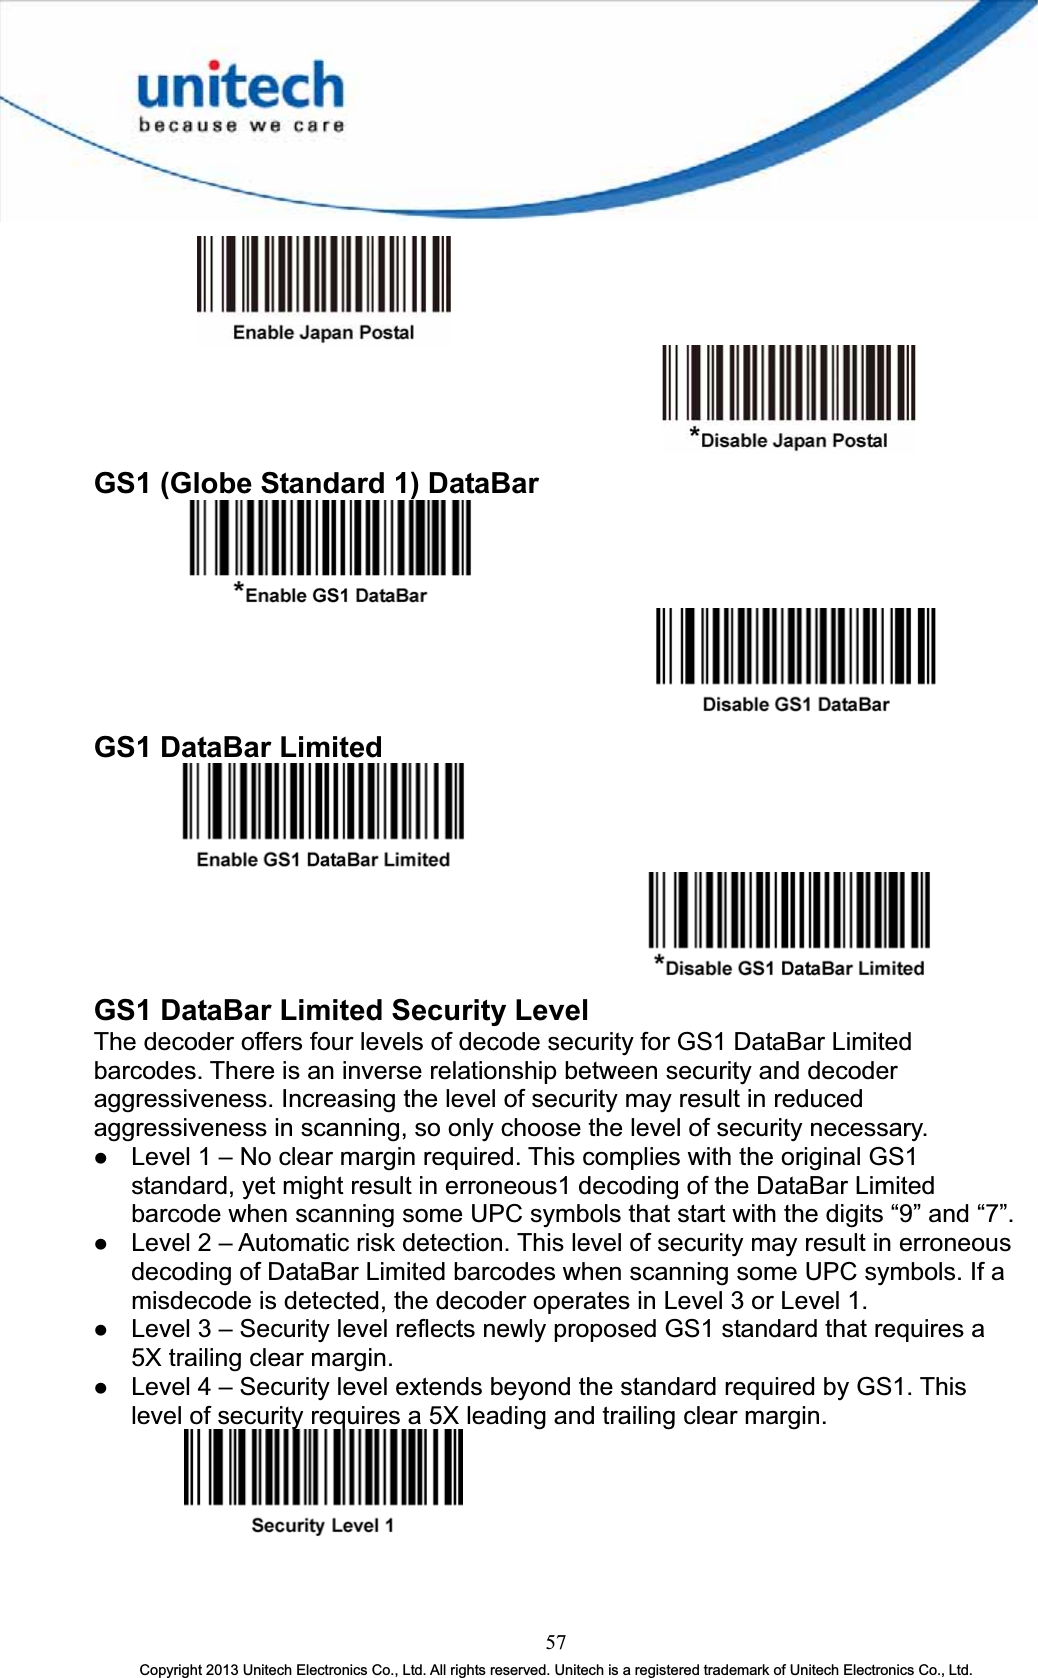 GS1 (Globe Standard 1) DataBar GS1 DataBar Limited GS1 DataBar Limited Security Level The decoder offers four levels of decode security for GS1 DataBar Limited barcodes. There is an inverse relationship between security and decoder aggressiveness. Increasing the level of security may result in reduced aggressiveness in scanning, so only choose the level of security necessary. z Level 1 – No clear margin required. This complies with the original GS1 standard, yet might result in erroneous1 decoding of the DataBar Limited barcode when scanning some UPC symbols that start with the digits “9” and “7”. z Level 2 – Automatic risk detection. This level of security may result in erroneous decoding of DataBar Limited barcodes when scanning some UPC symbols. If a misdecode is detected, the decoder operates in Level 3 or Level 1. z Level 3 – Security level reflects newly proposed GS1 standard that requires a 5X trailing clear margin. z Level 4 – Security level extends beyond the standard required by GS1. This level of security requires a 5X leading and trailing clear margin. 57Copyright 2013 Unitech Electronics Co., Ltd. All rights reserved. Unitech is a registered trademark of Unitech Electronics Co., Ltd. 